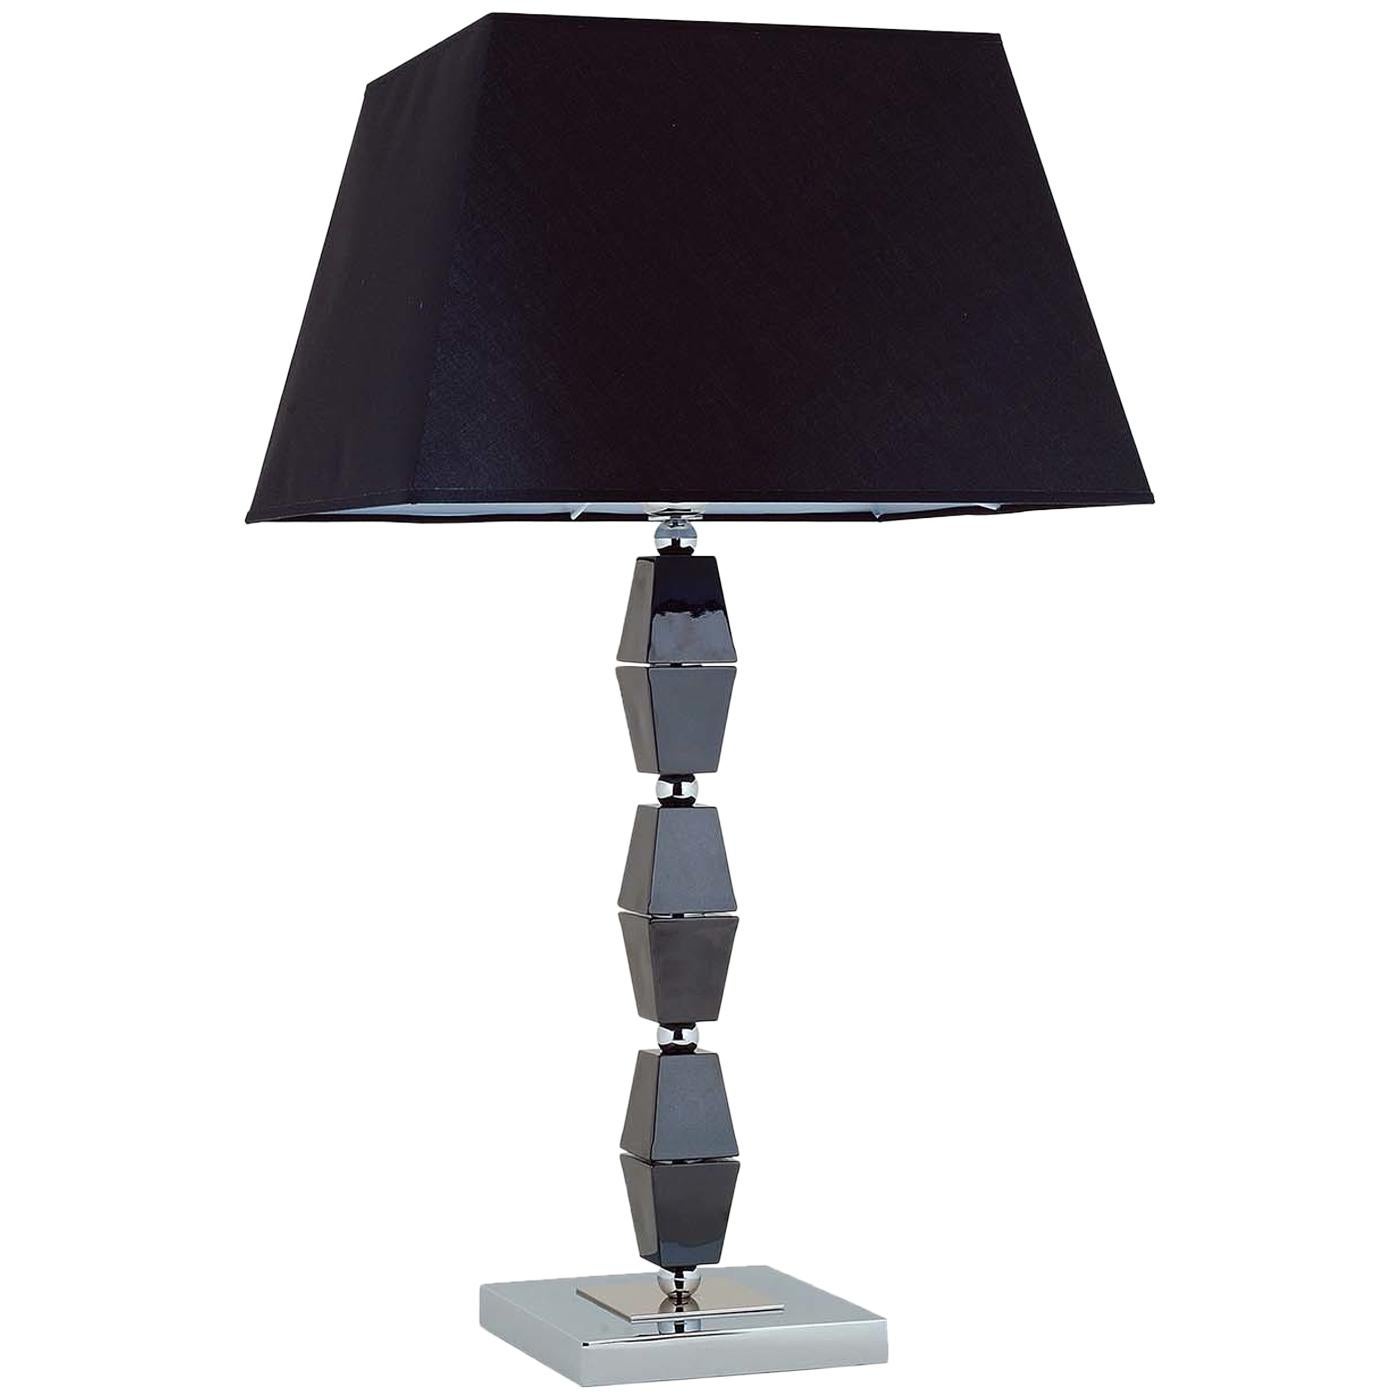 Doris Table Lamp by CosmoTre